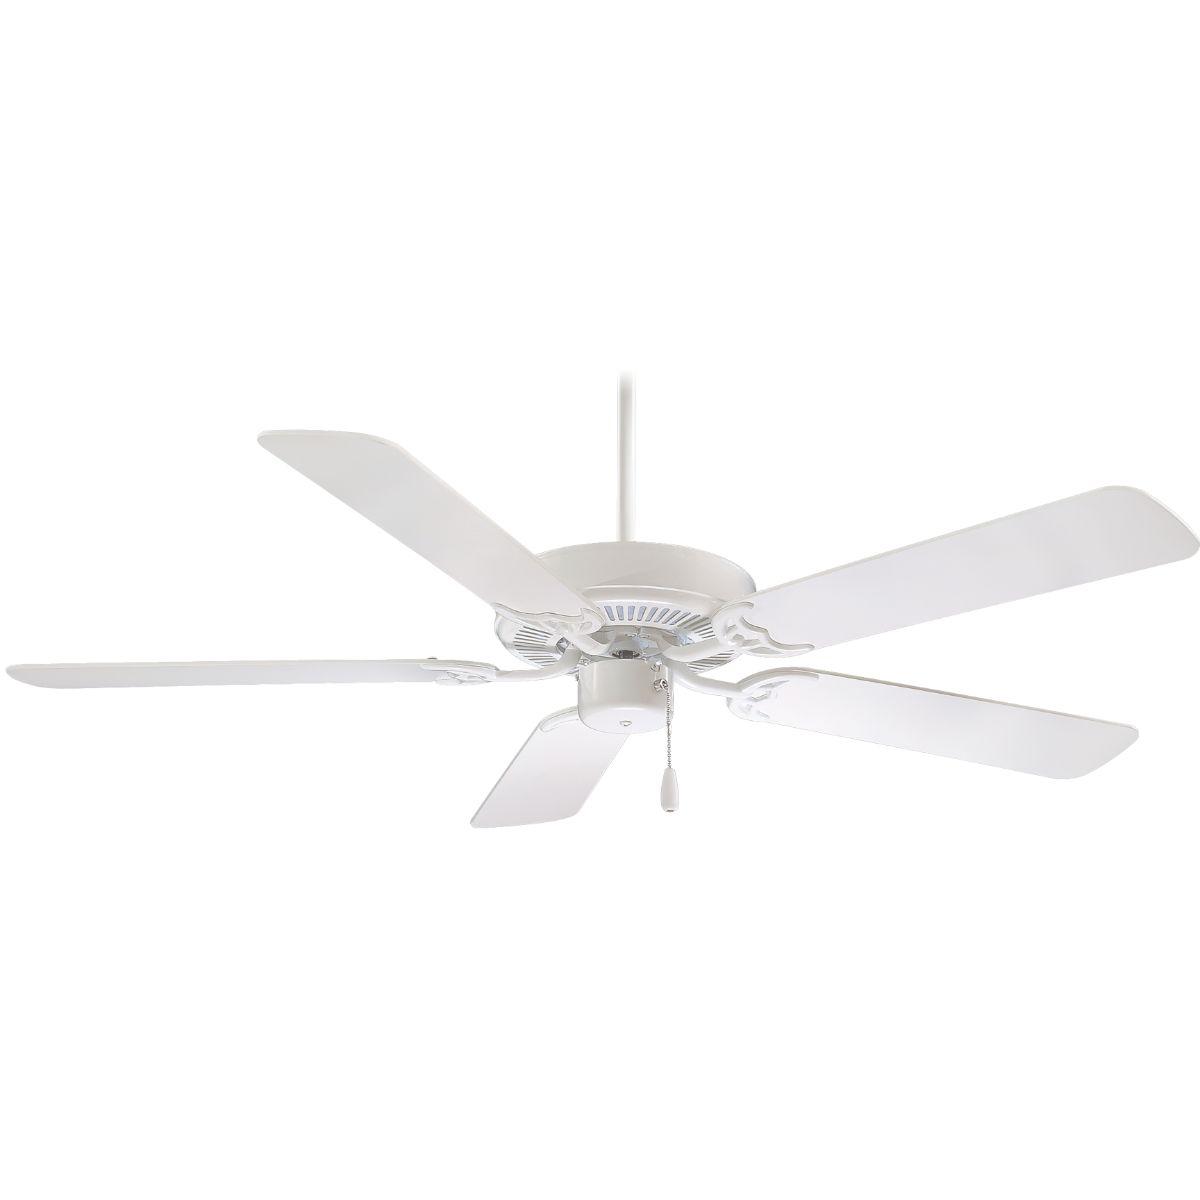 Contractor 52 Inch Ceiling Fan With Pull Chain